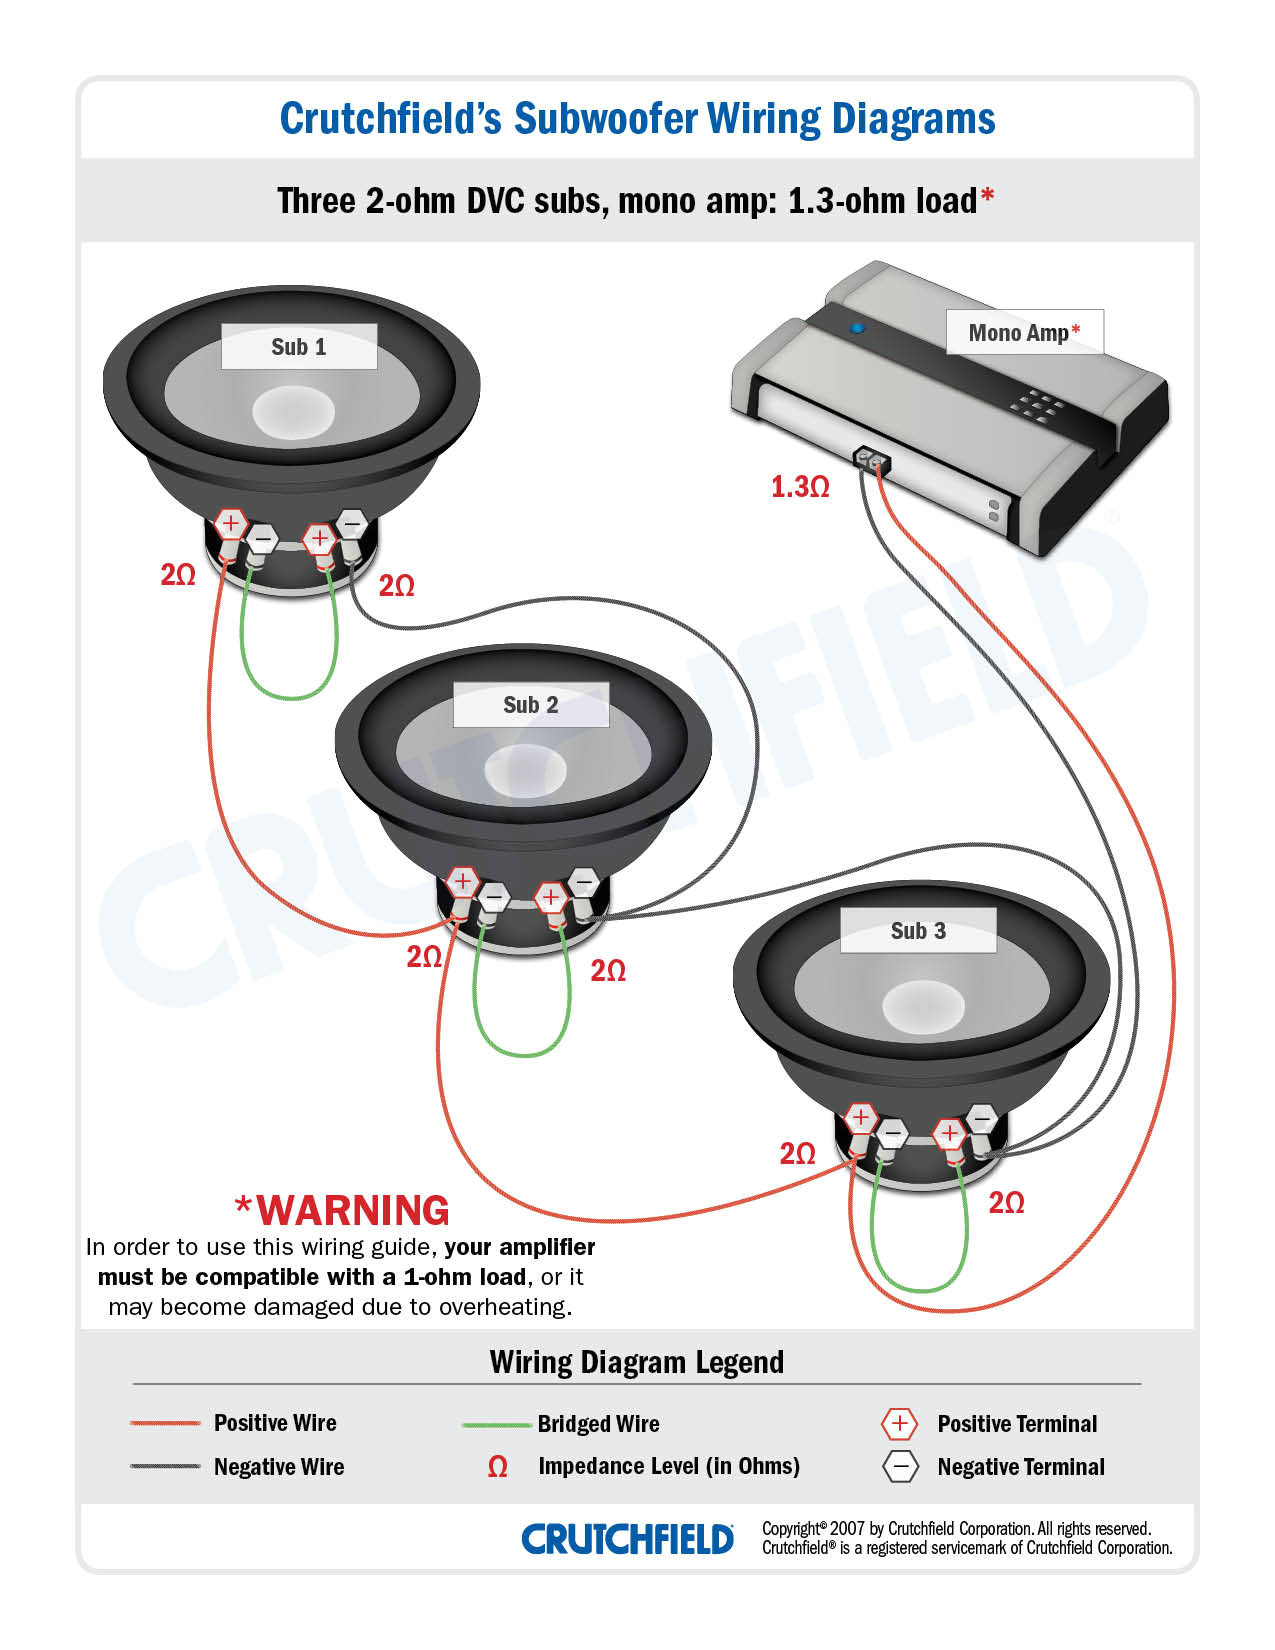 ron three dvc 2 ohm subs get wired to a mono amp capable of driving a 1 ohm load like this